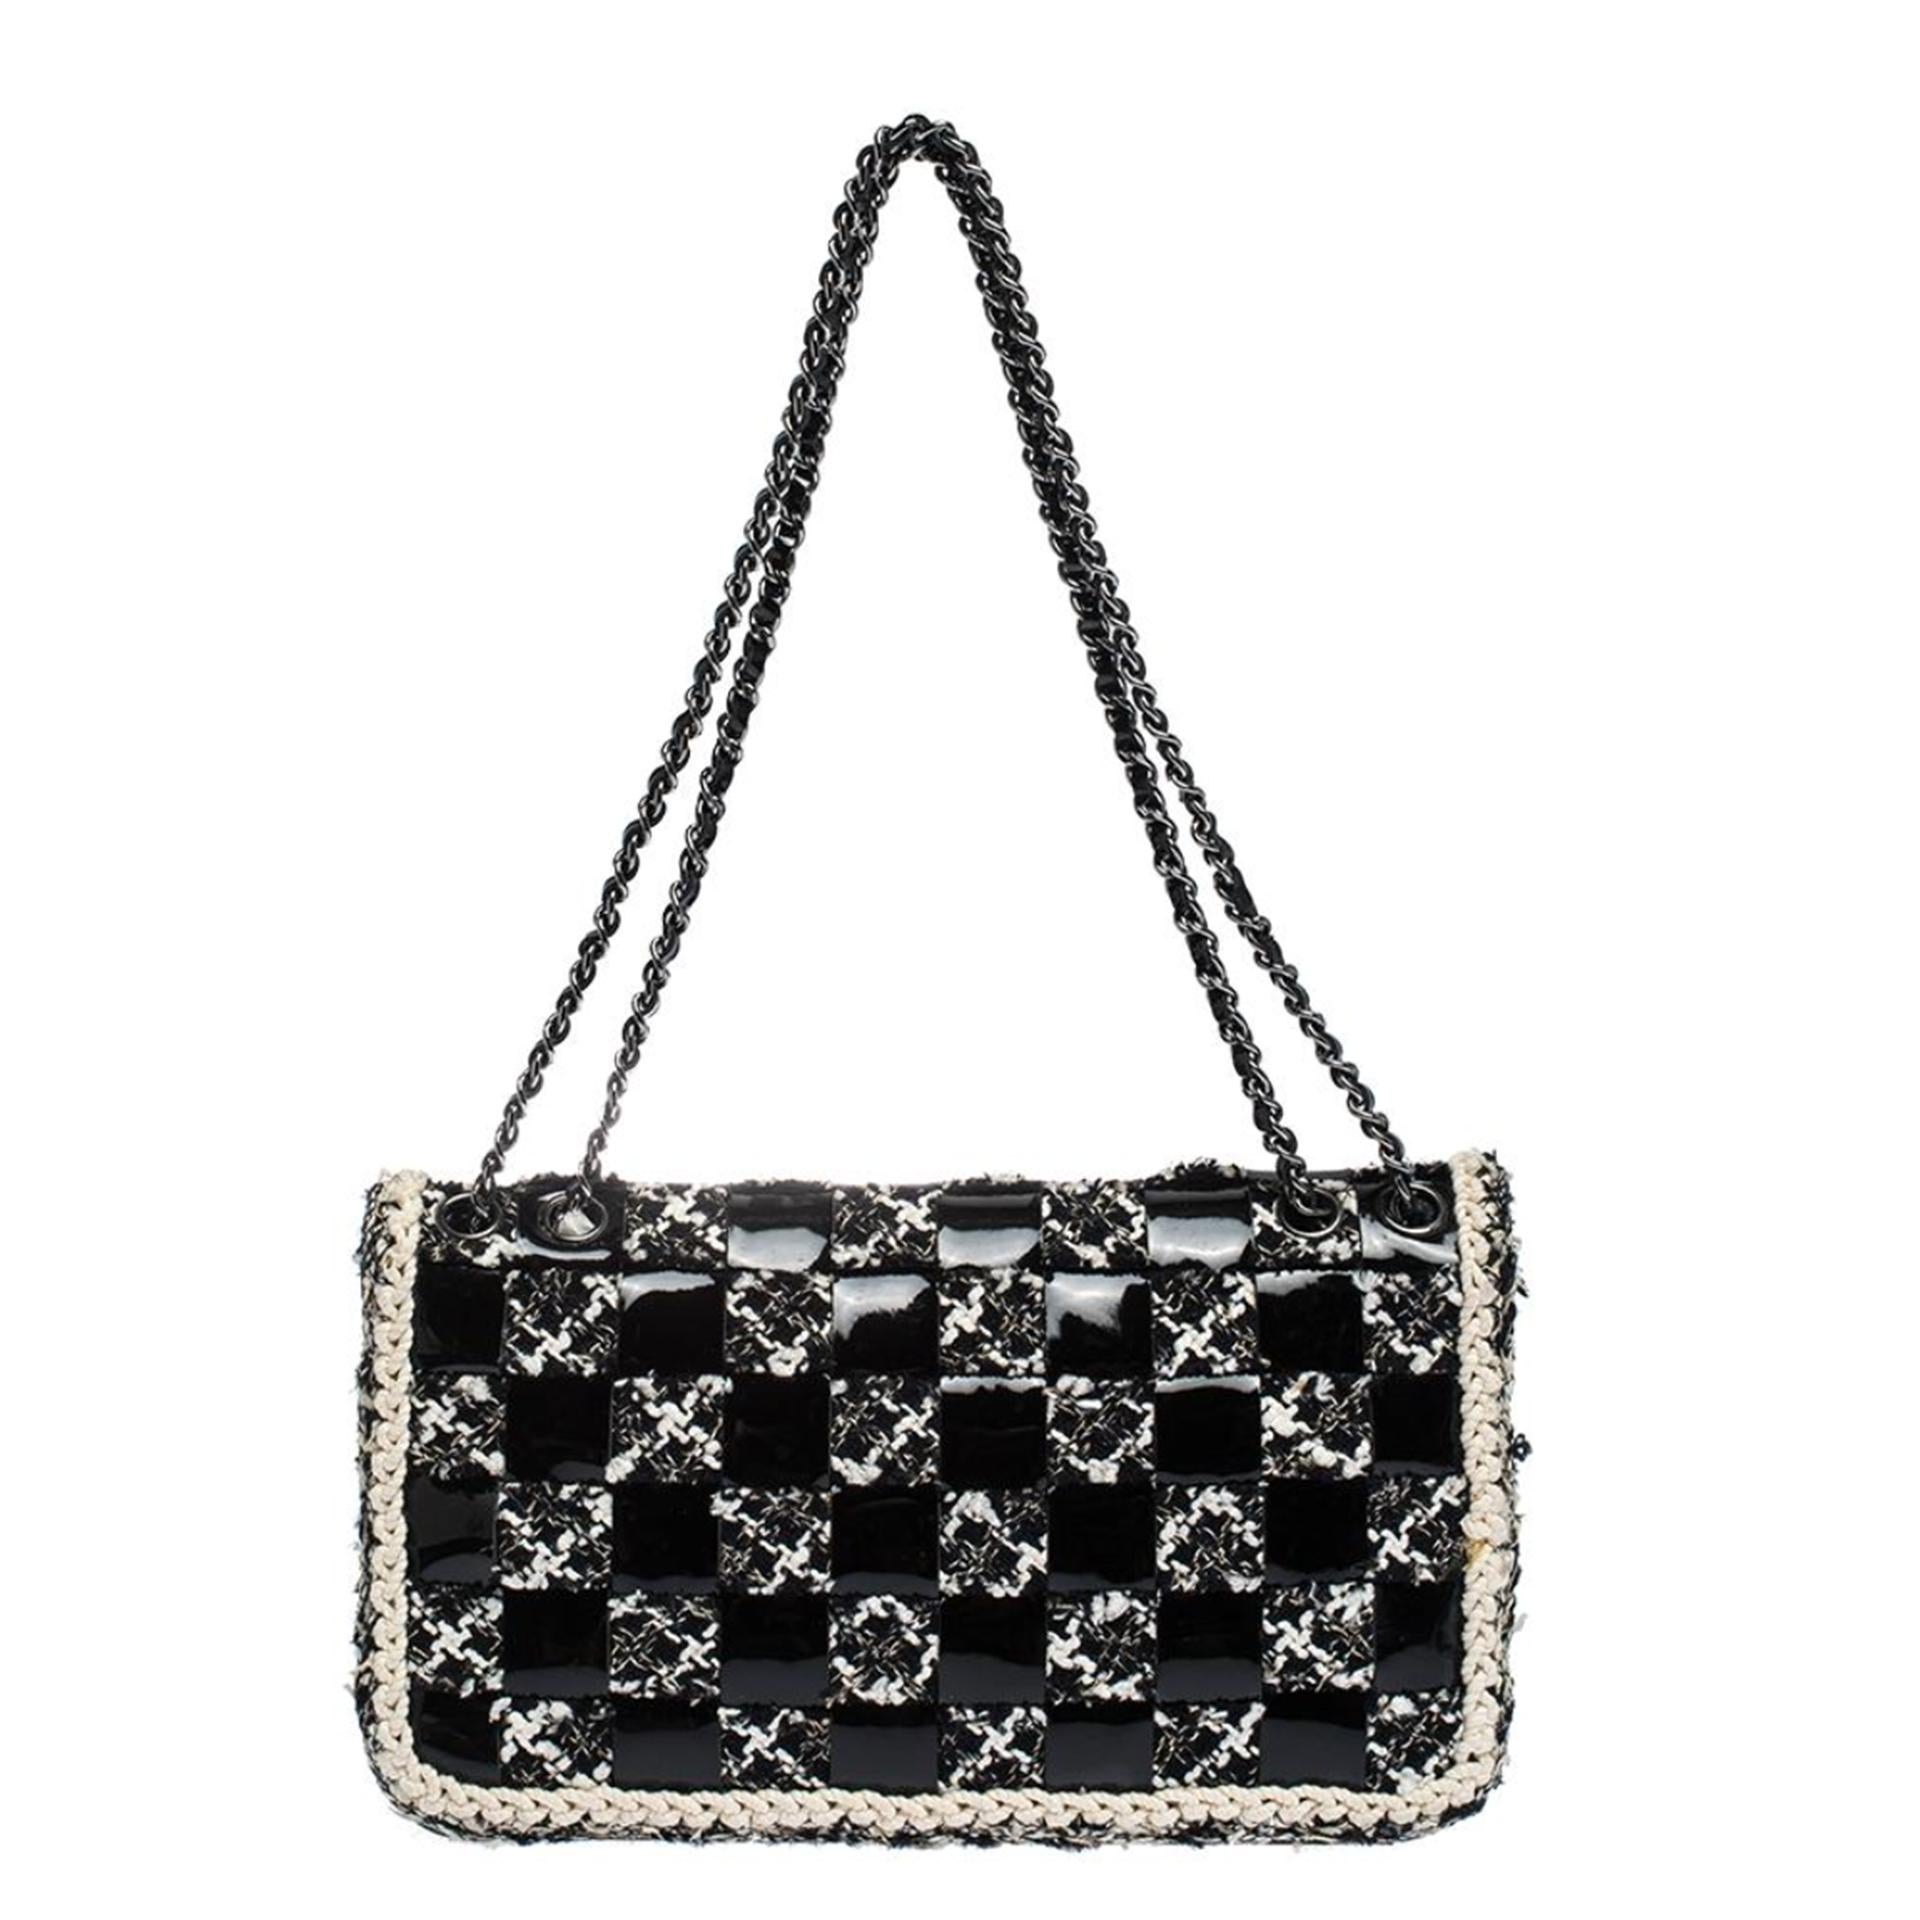 Chanel Black White Tweed Vintage Interwoven Classic Flap Bag In Good Condition For Sale In Miami, FL